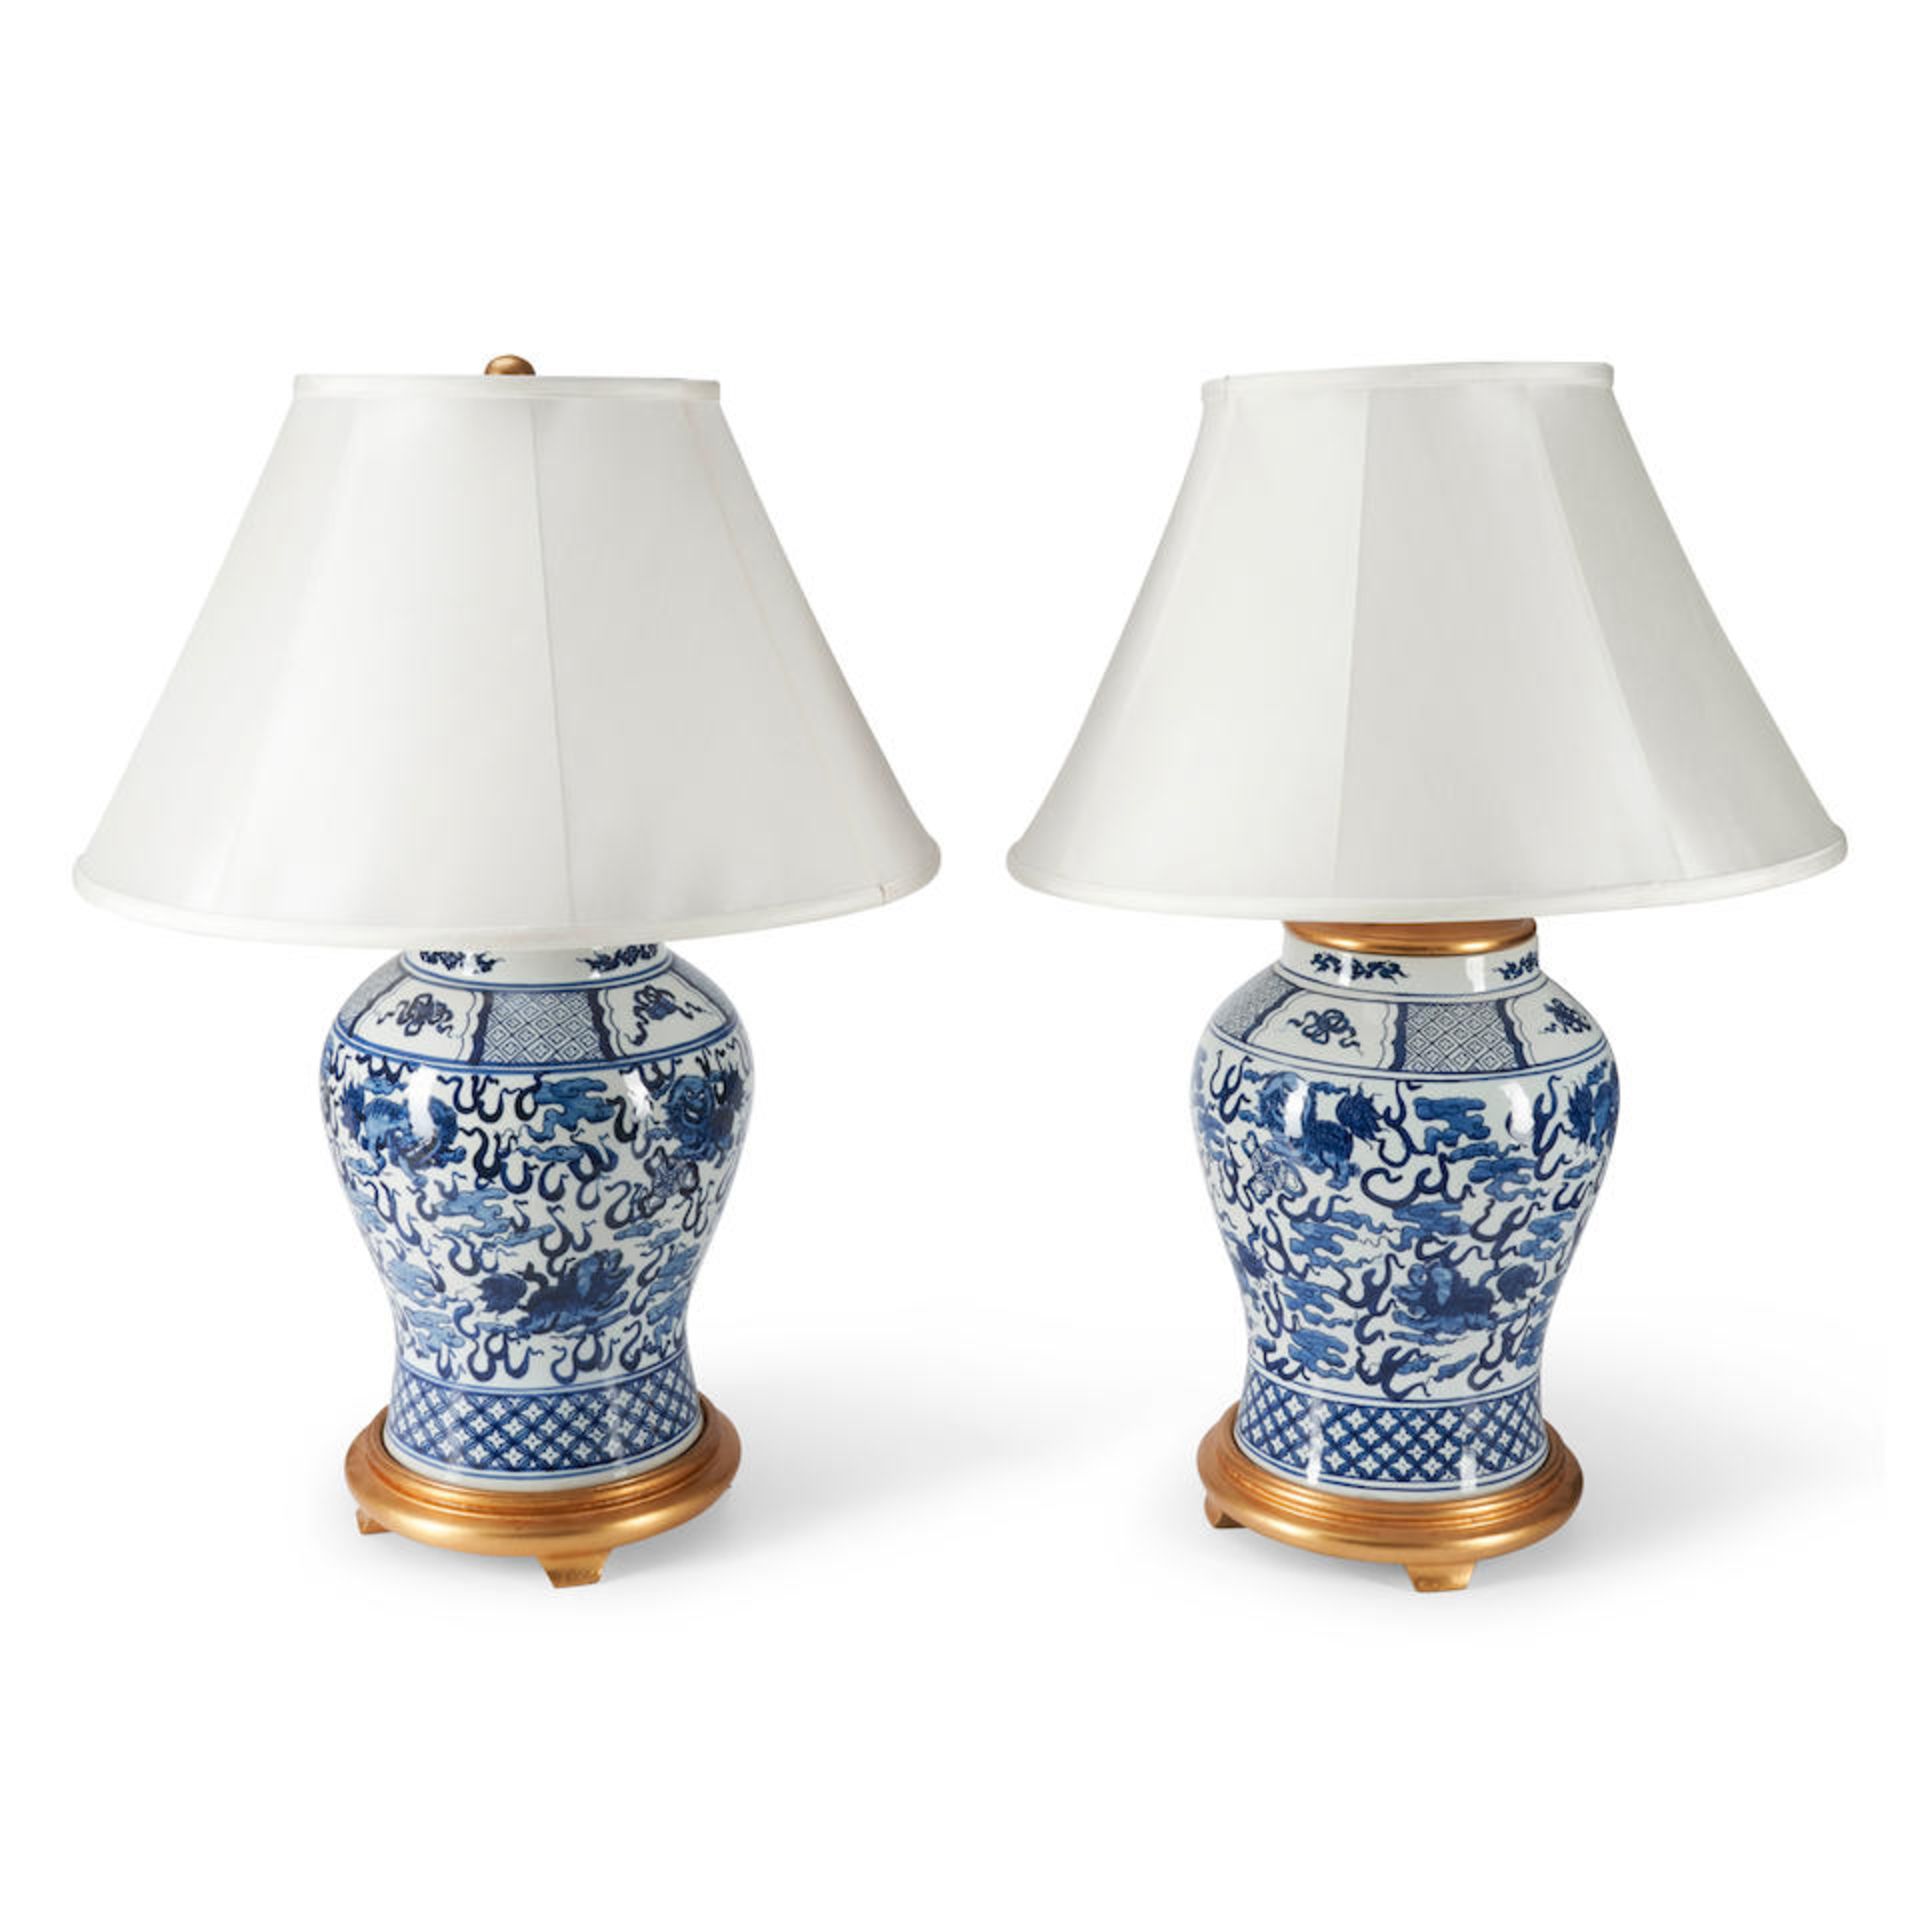 Pair of Chinese Blue and White Baluster Vases Mounted as Lamps, China, 20th/21st century.